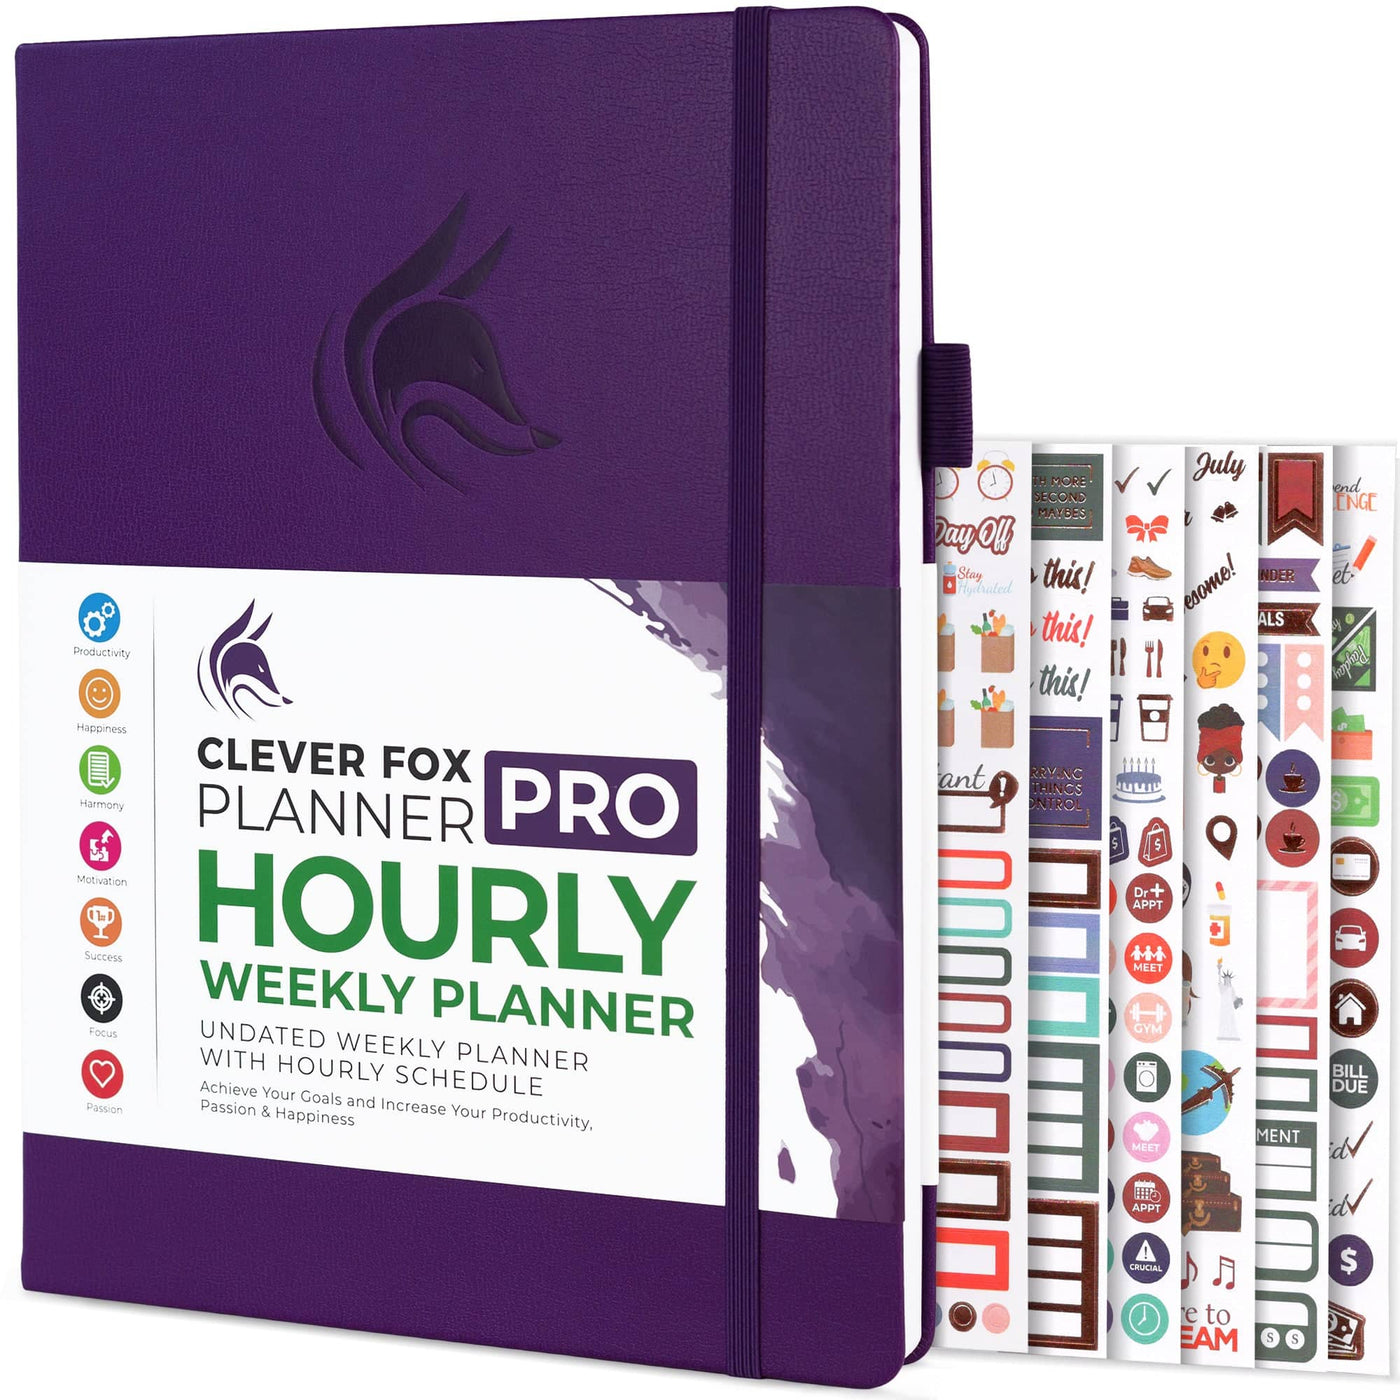 Clever Fox Planner PRO Hourly (6AM-9PM Schedule)